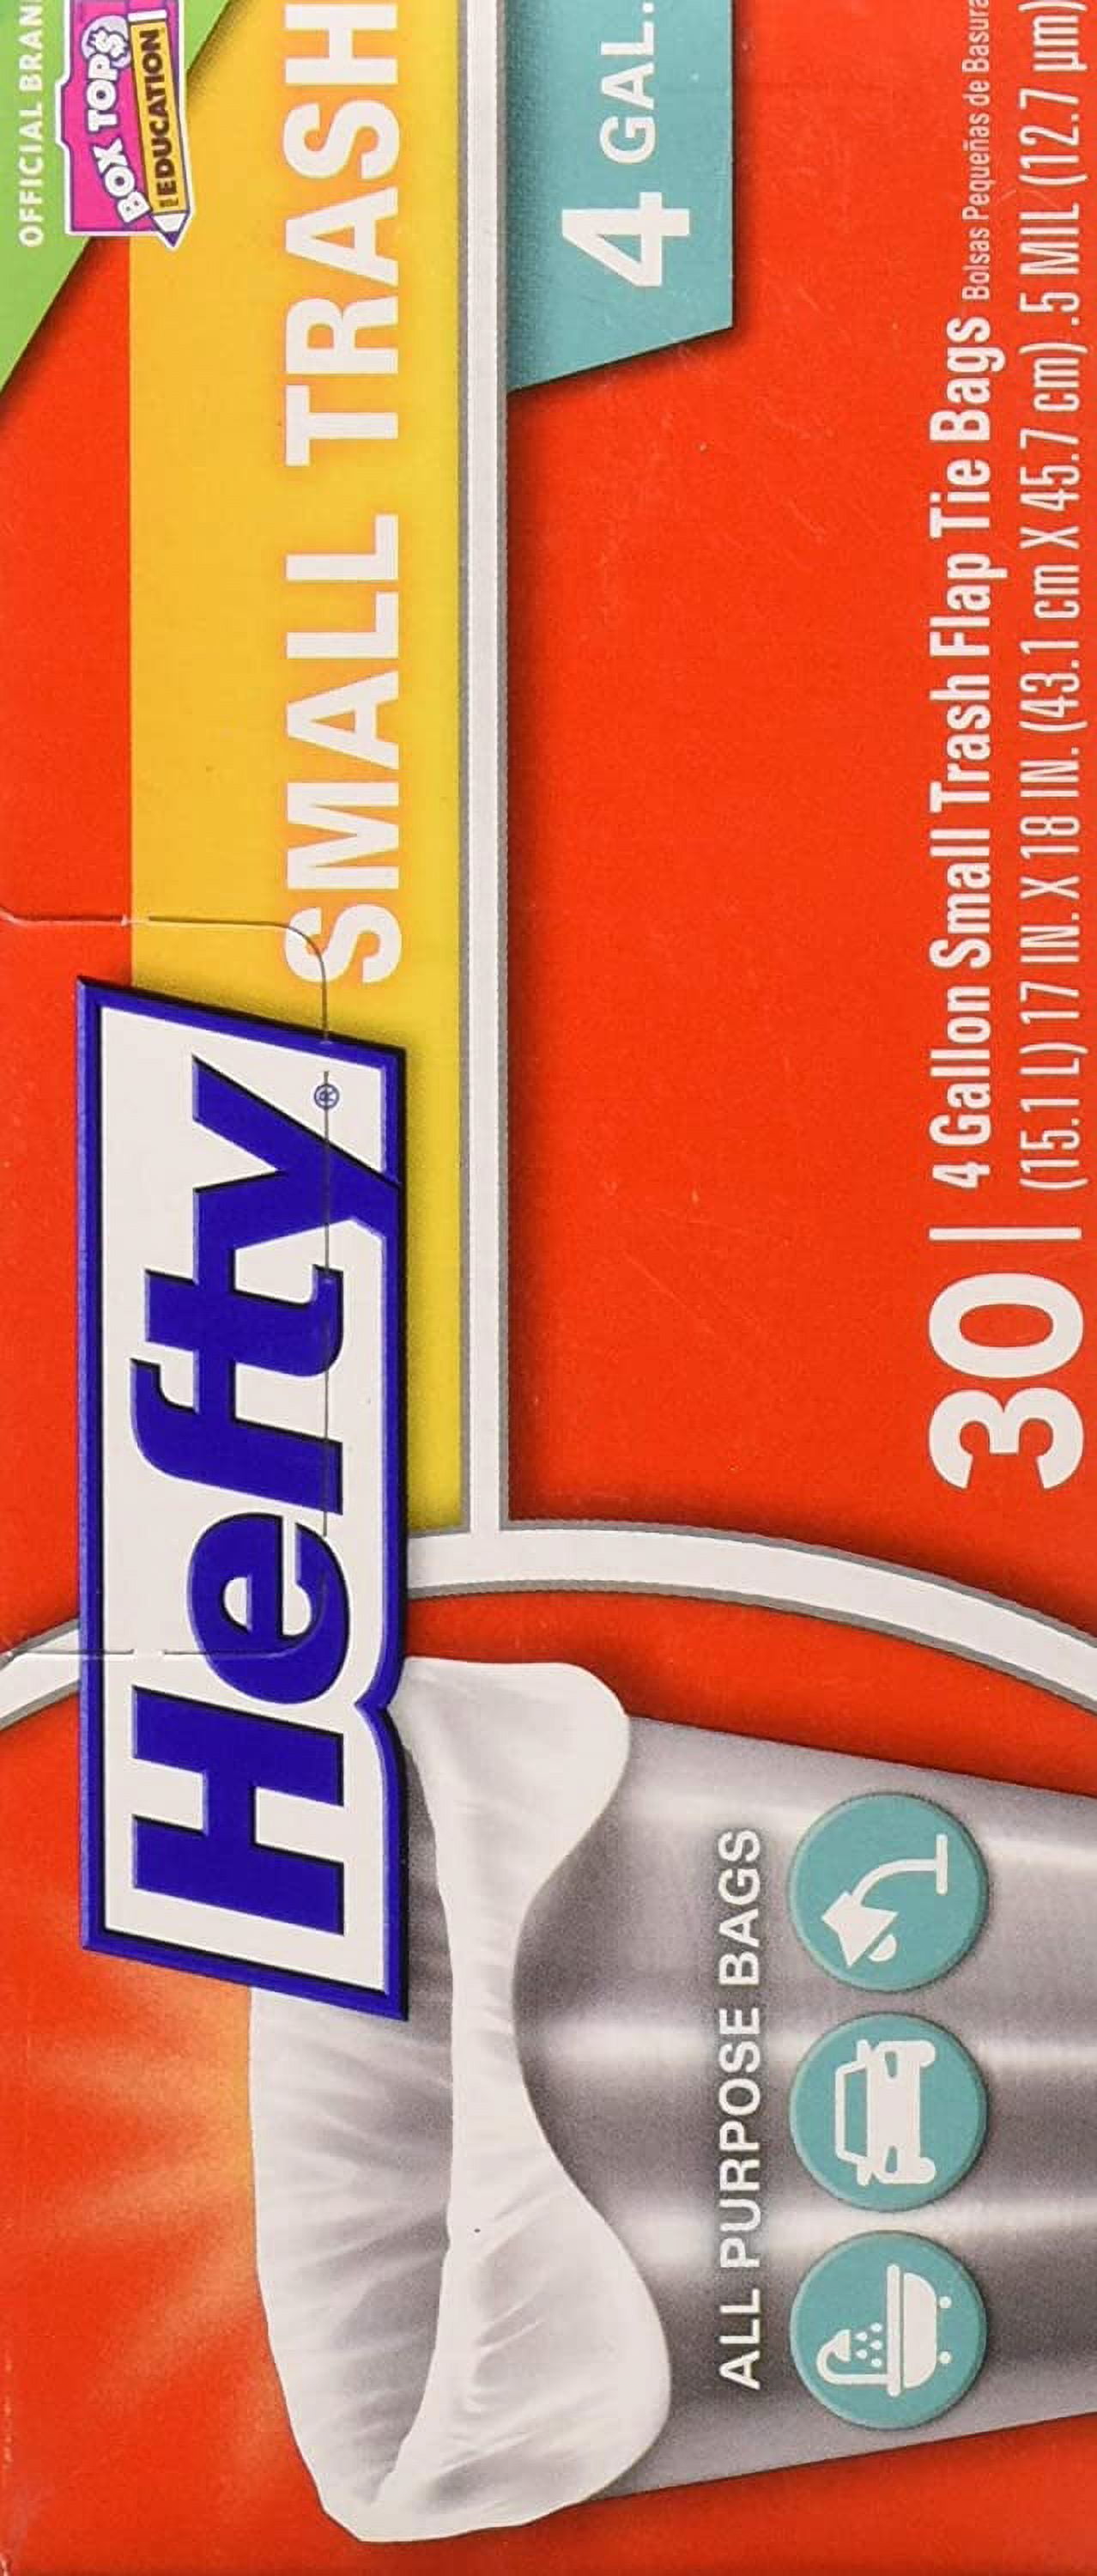 Hefty Flap Tie Small Trash Bags - Clean Burst, 4 Gallon, 312 Total,26 Count  (Pack of 12) Only $17.31 – $21.16 + Free Shipping With Subscribe & Save  From  (was $38.46)! - Kollel Budget